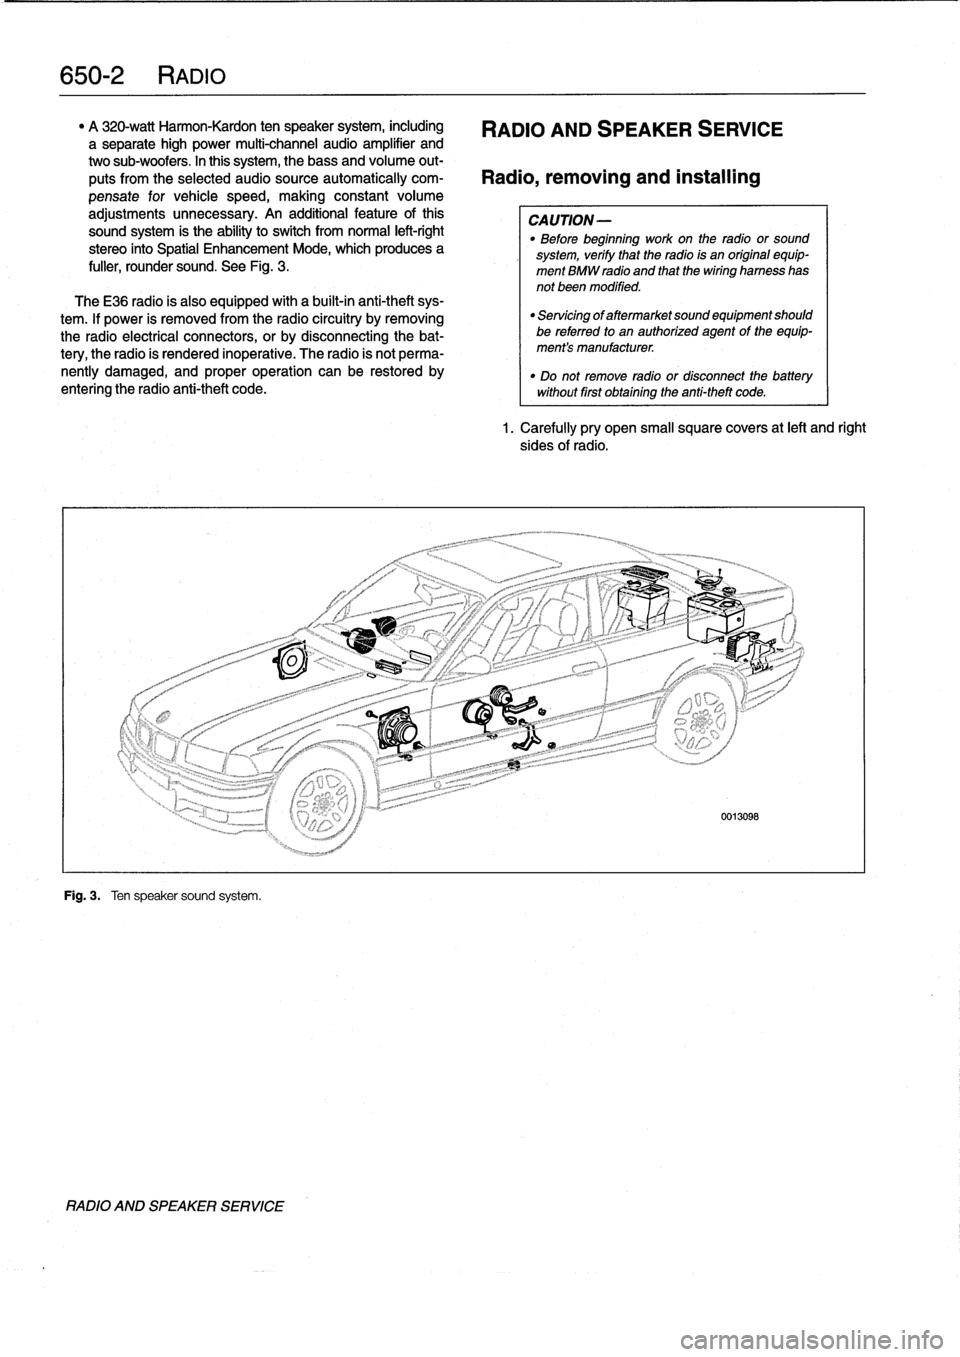 BMW 328i 1997 E36 User Guide 
650-2
RADIO

"
A
320-watt
Harmon-Kardon
ten
speaker
system,
including

	

RADIO
AND
SPEAKER
SERVICE
a
separate
high
power
multi-channel
audio
amplifier
and
two
sub-woofers
.
In
this
system,
thebass
a